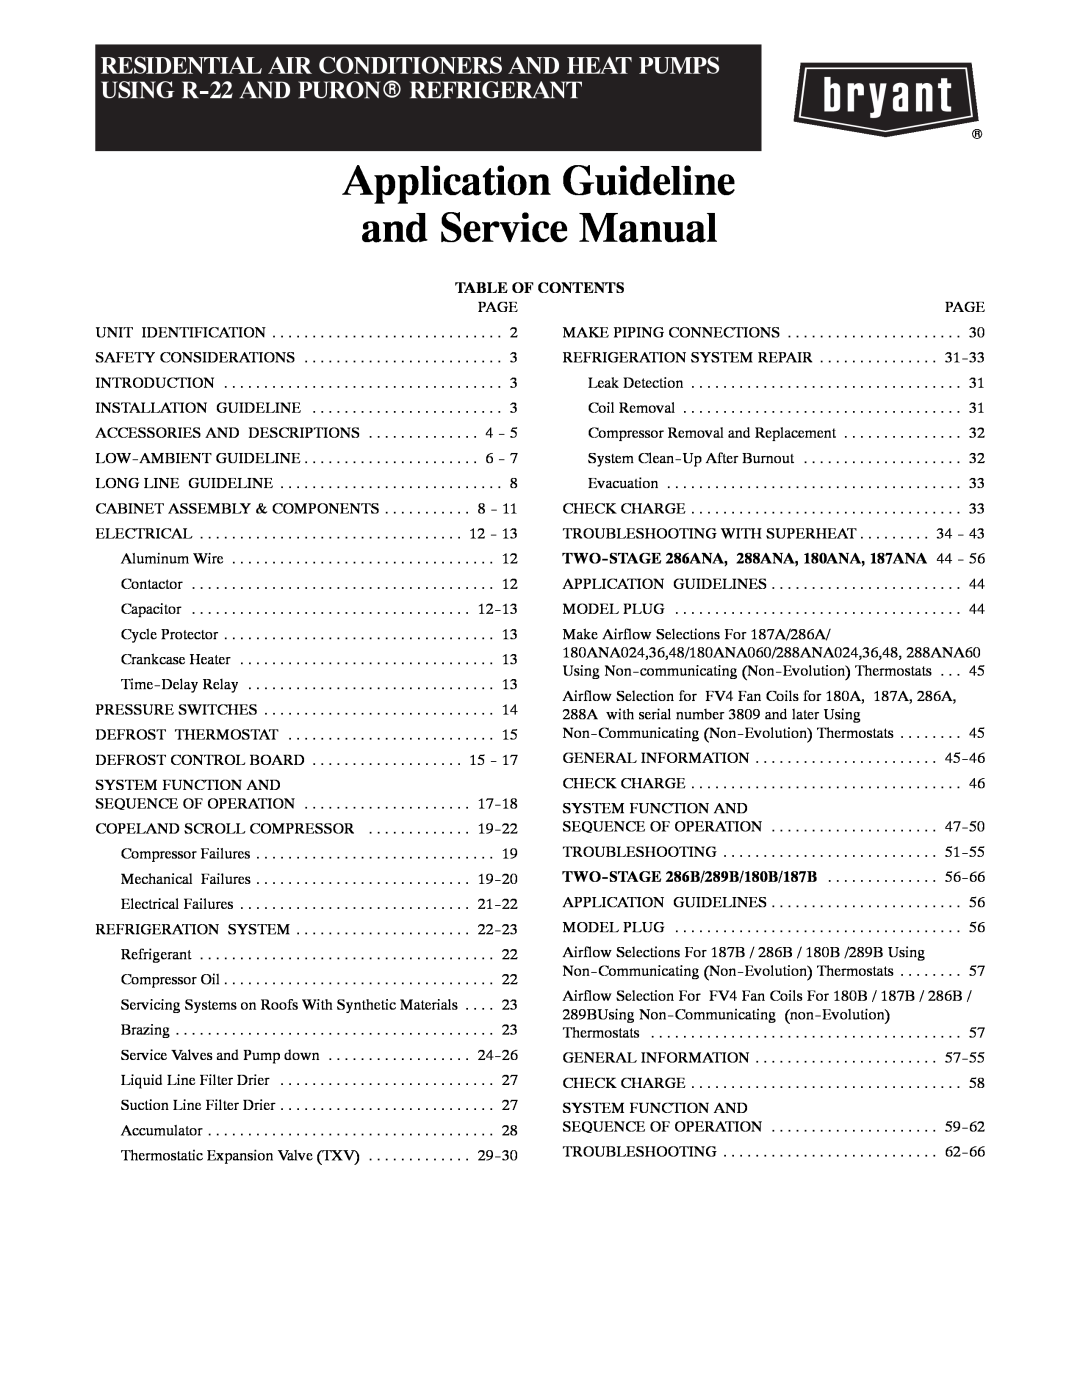 Bryant R-22 service manual Table Of Contents, Safety Considerations, Application Guide and Service Manual 